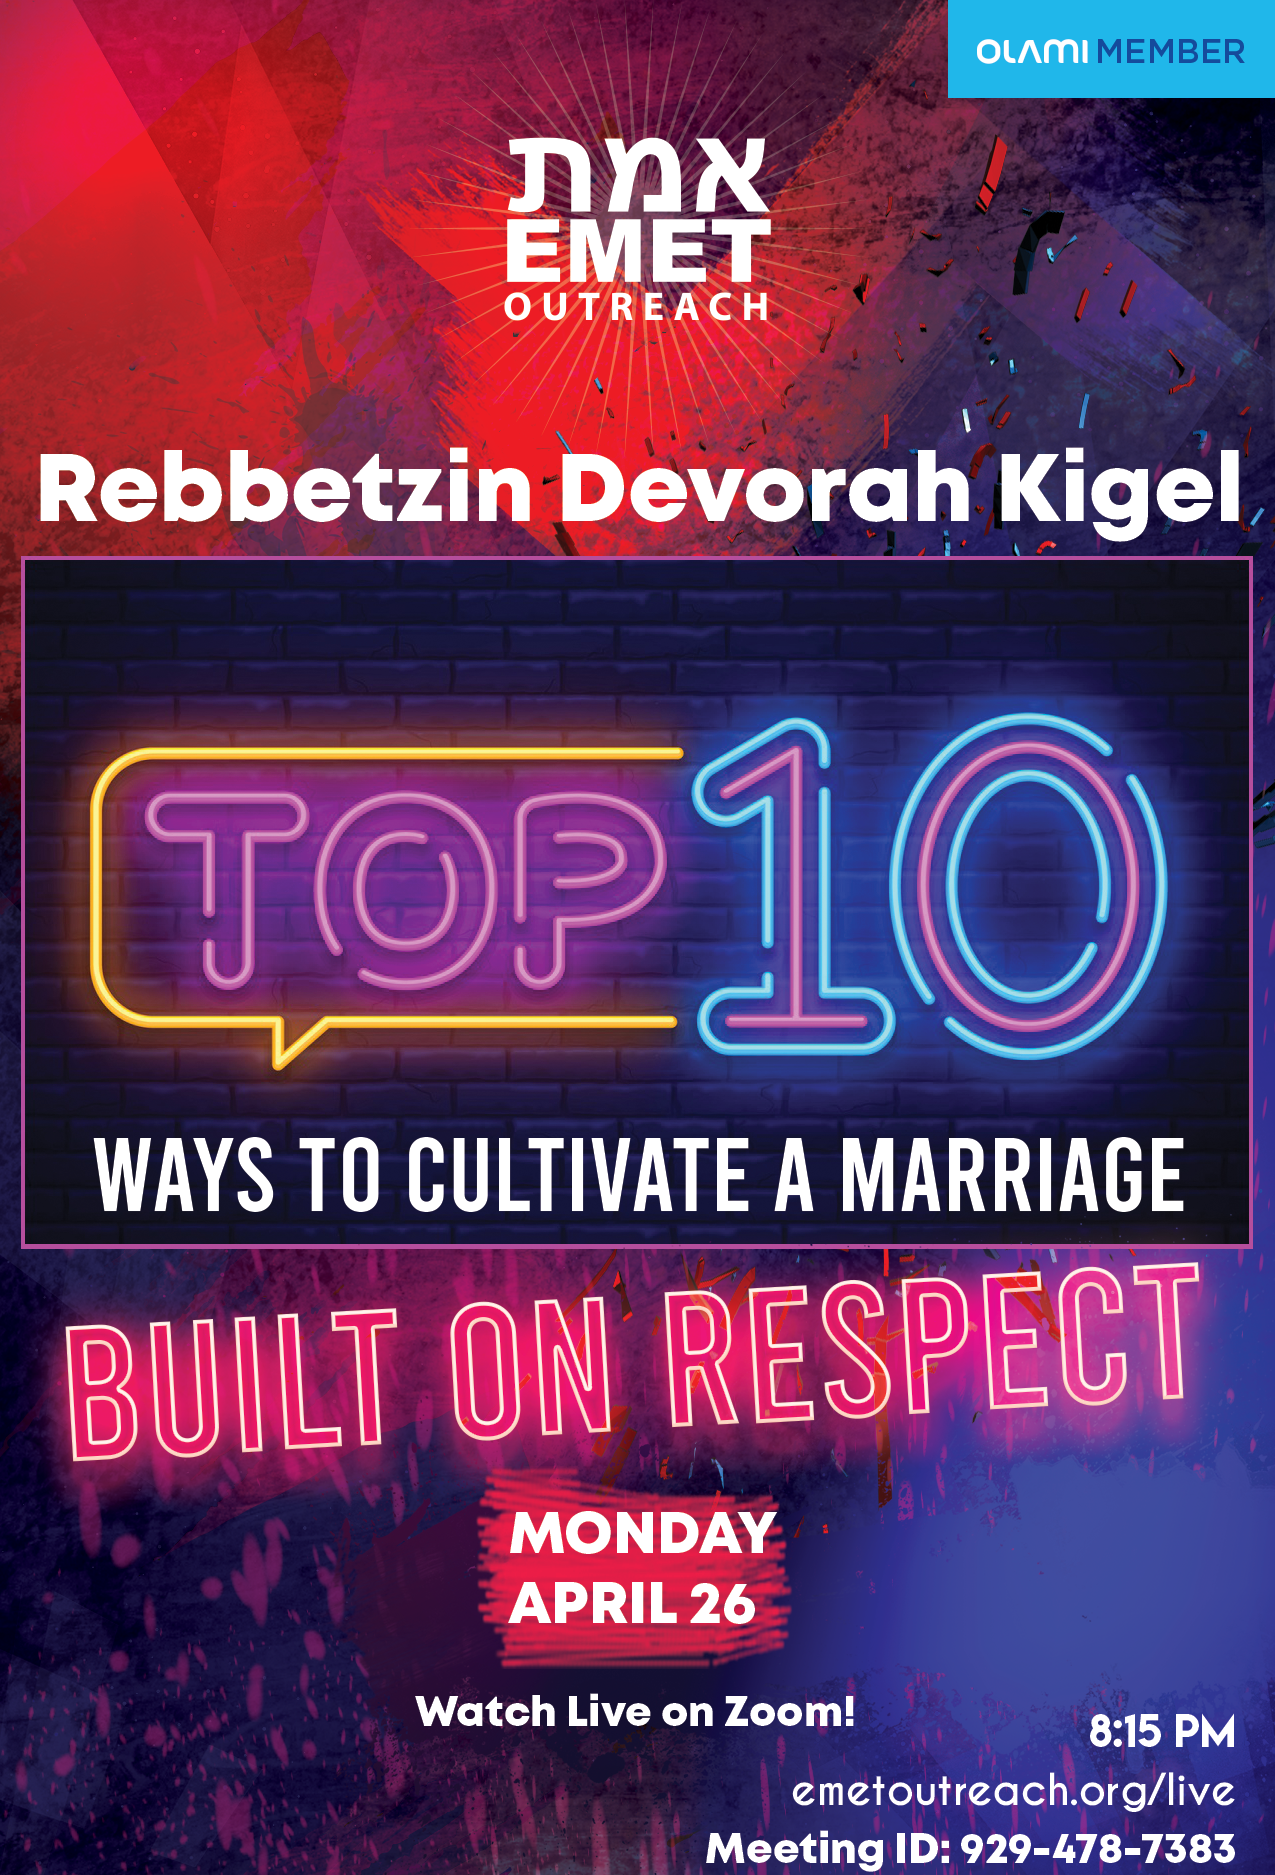 Reb Kigel Top 10 Ways To Cultivate Marrage Built on Respect 2021